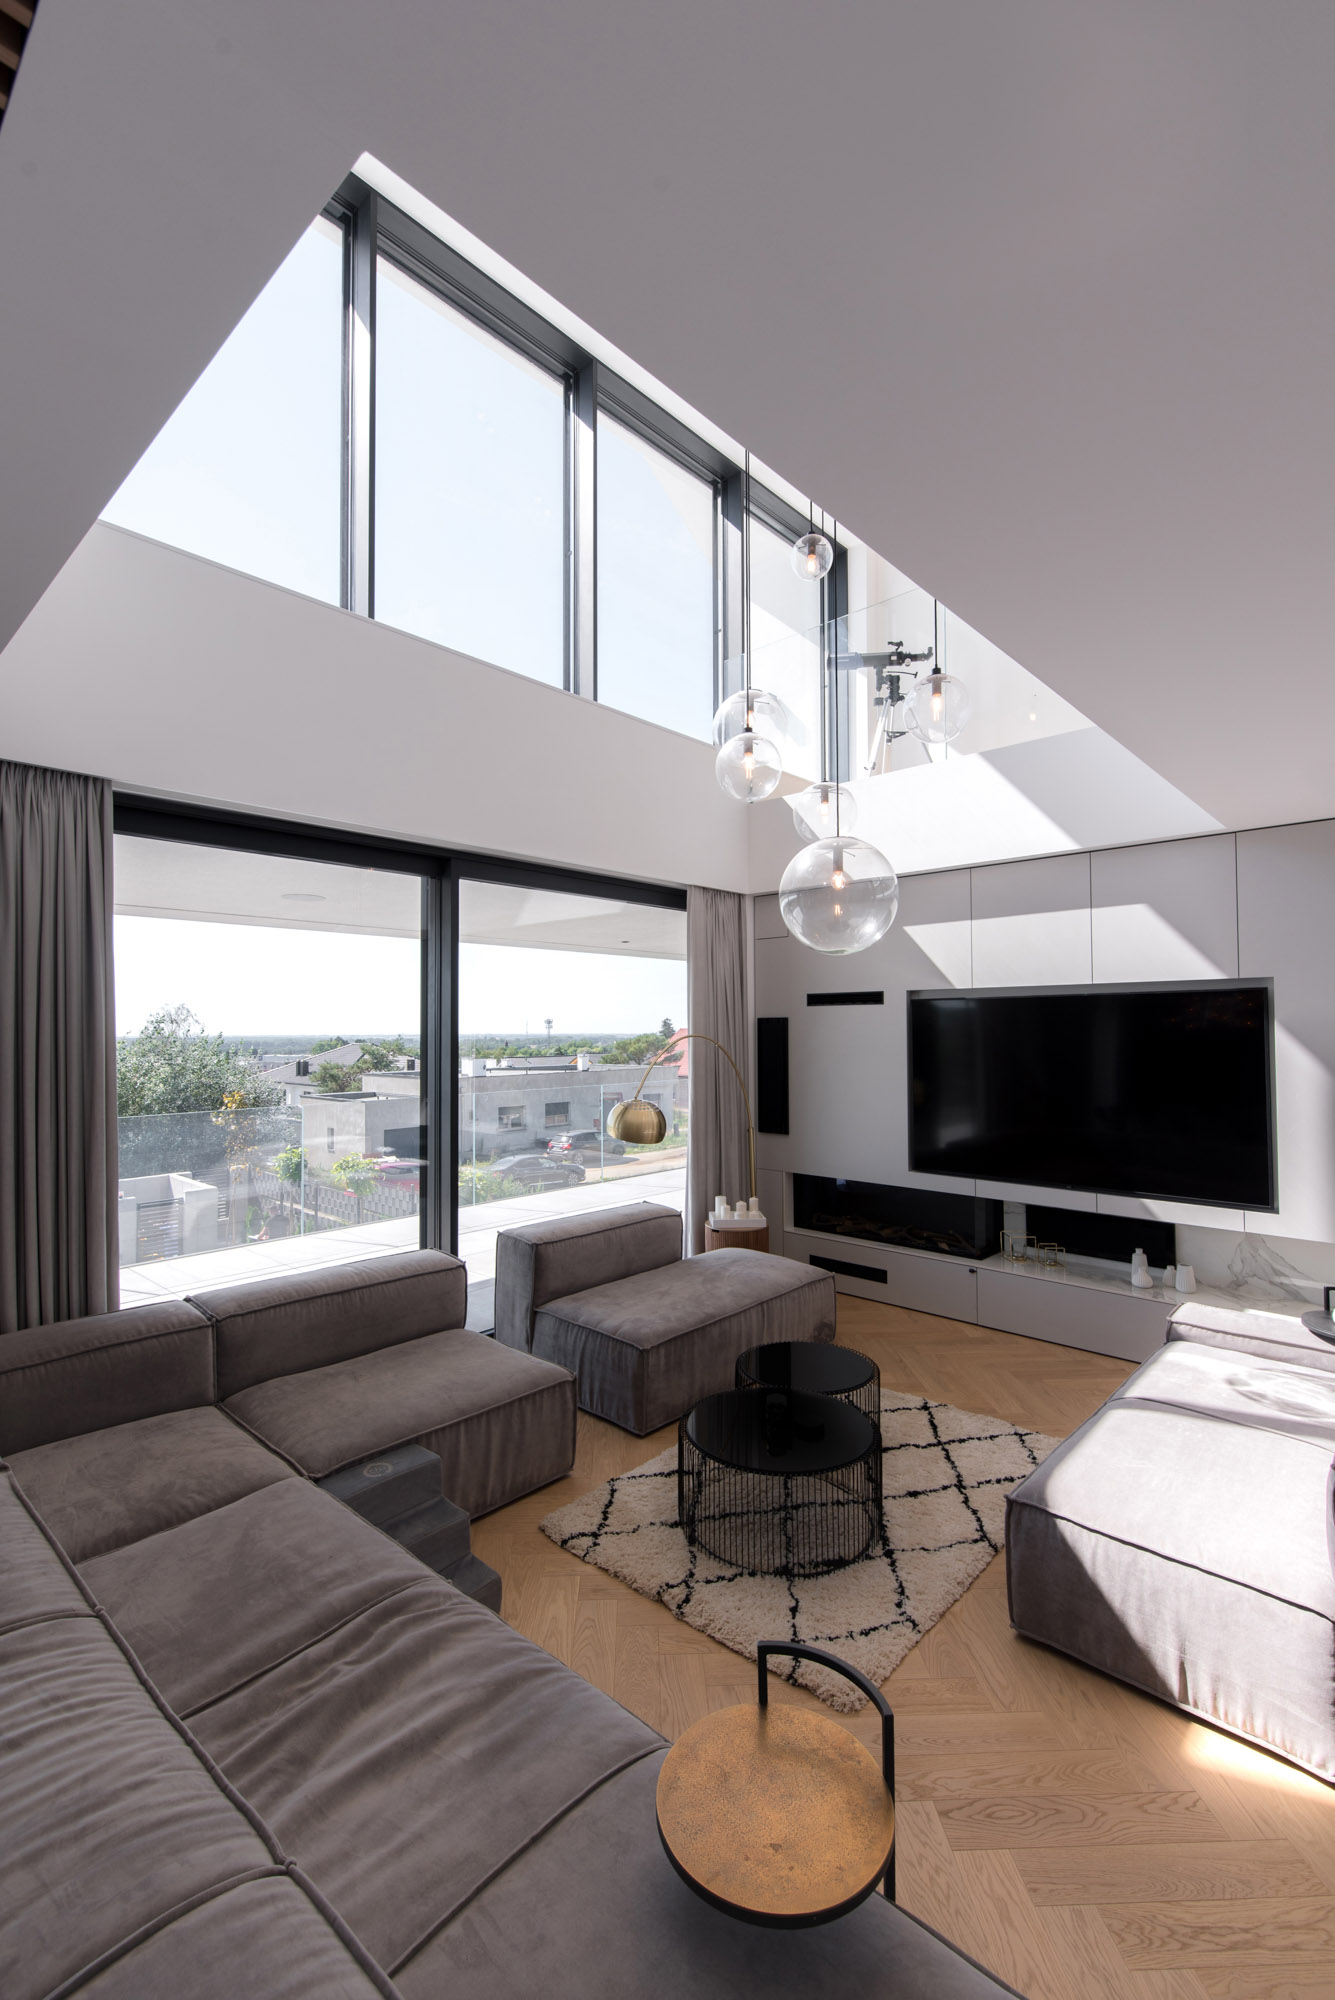 A living room that's furnished with a large modular sofa, creating plenty of room for relaxing. A double height ceiling void allows the natural light from the upper windows to filter through.